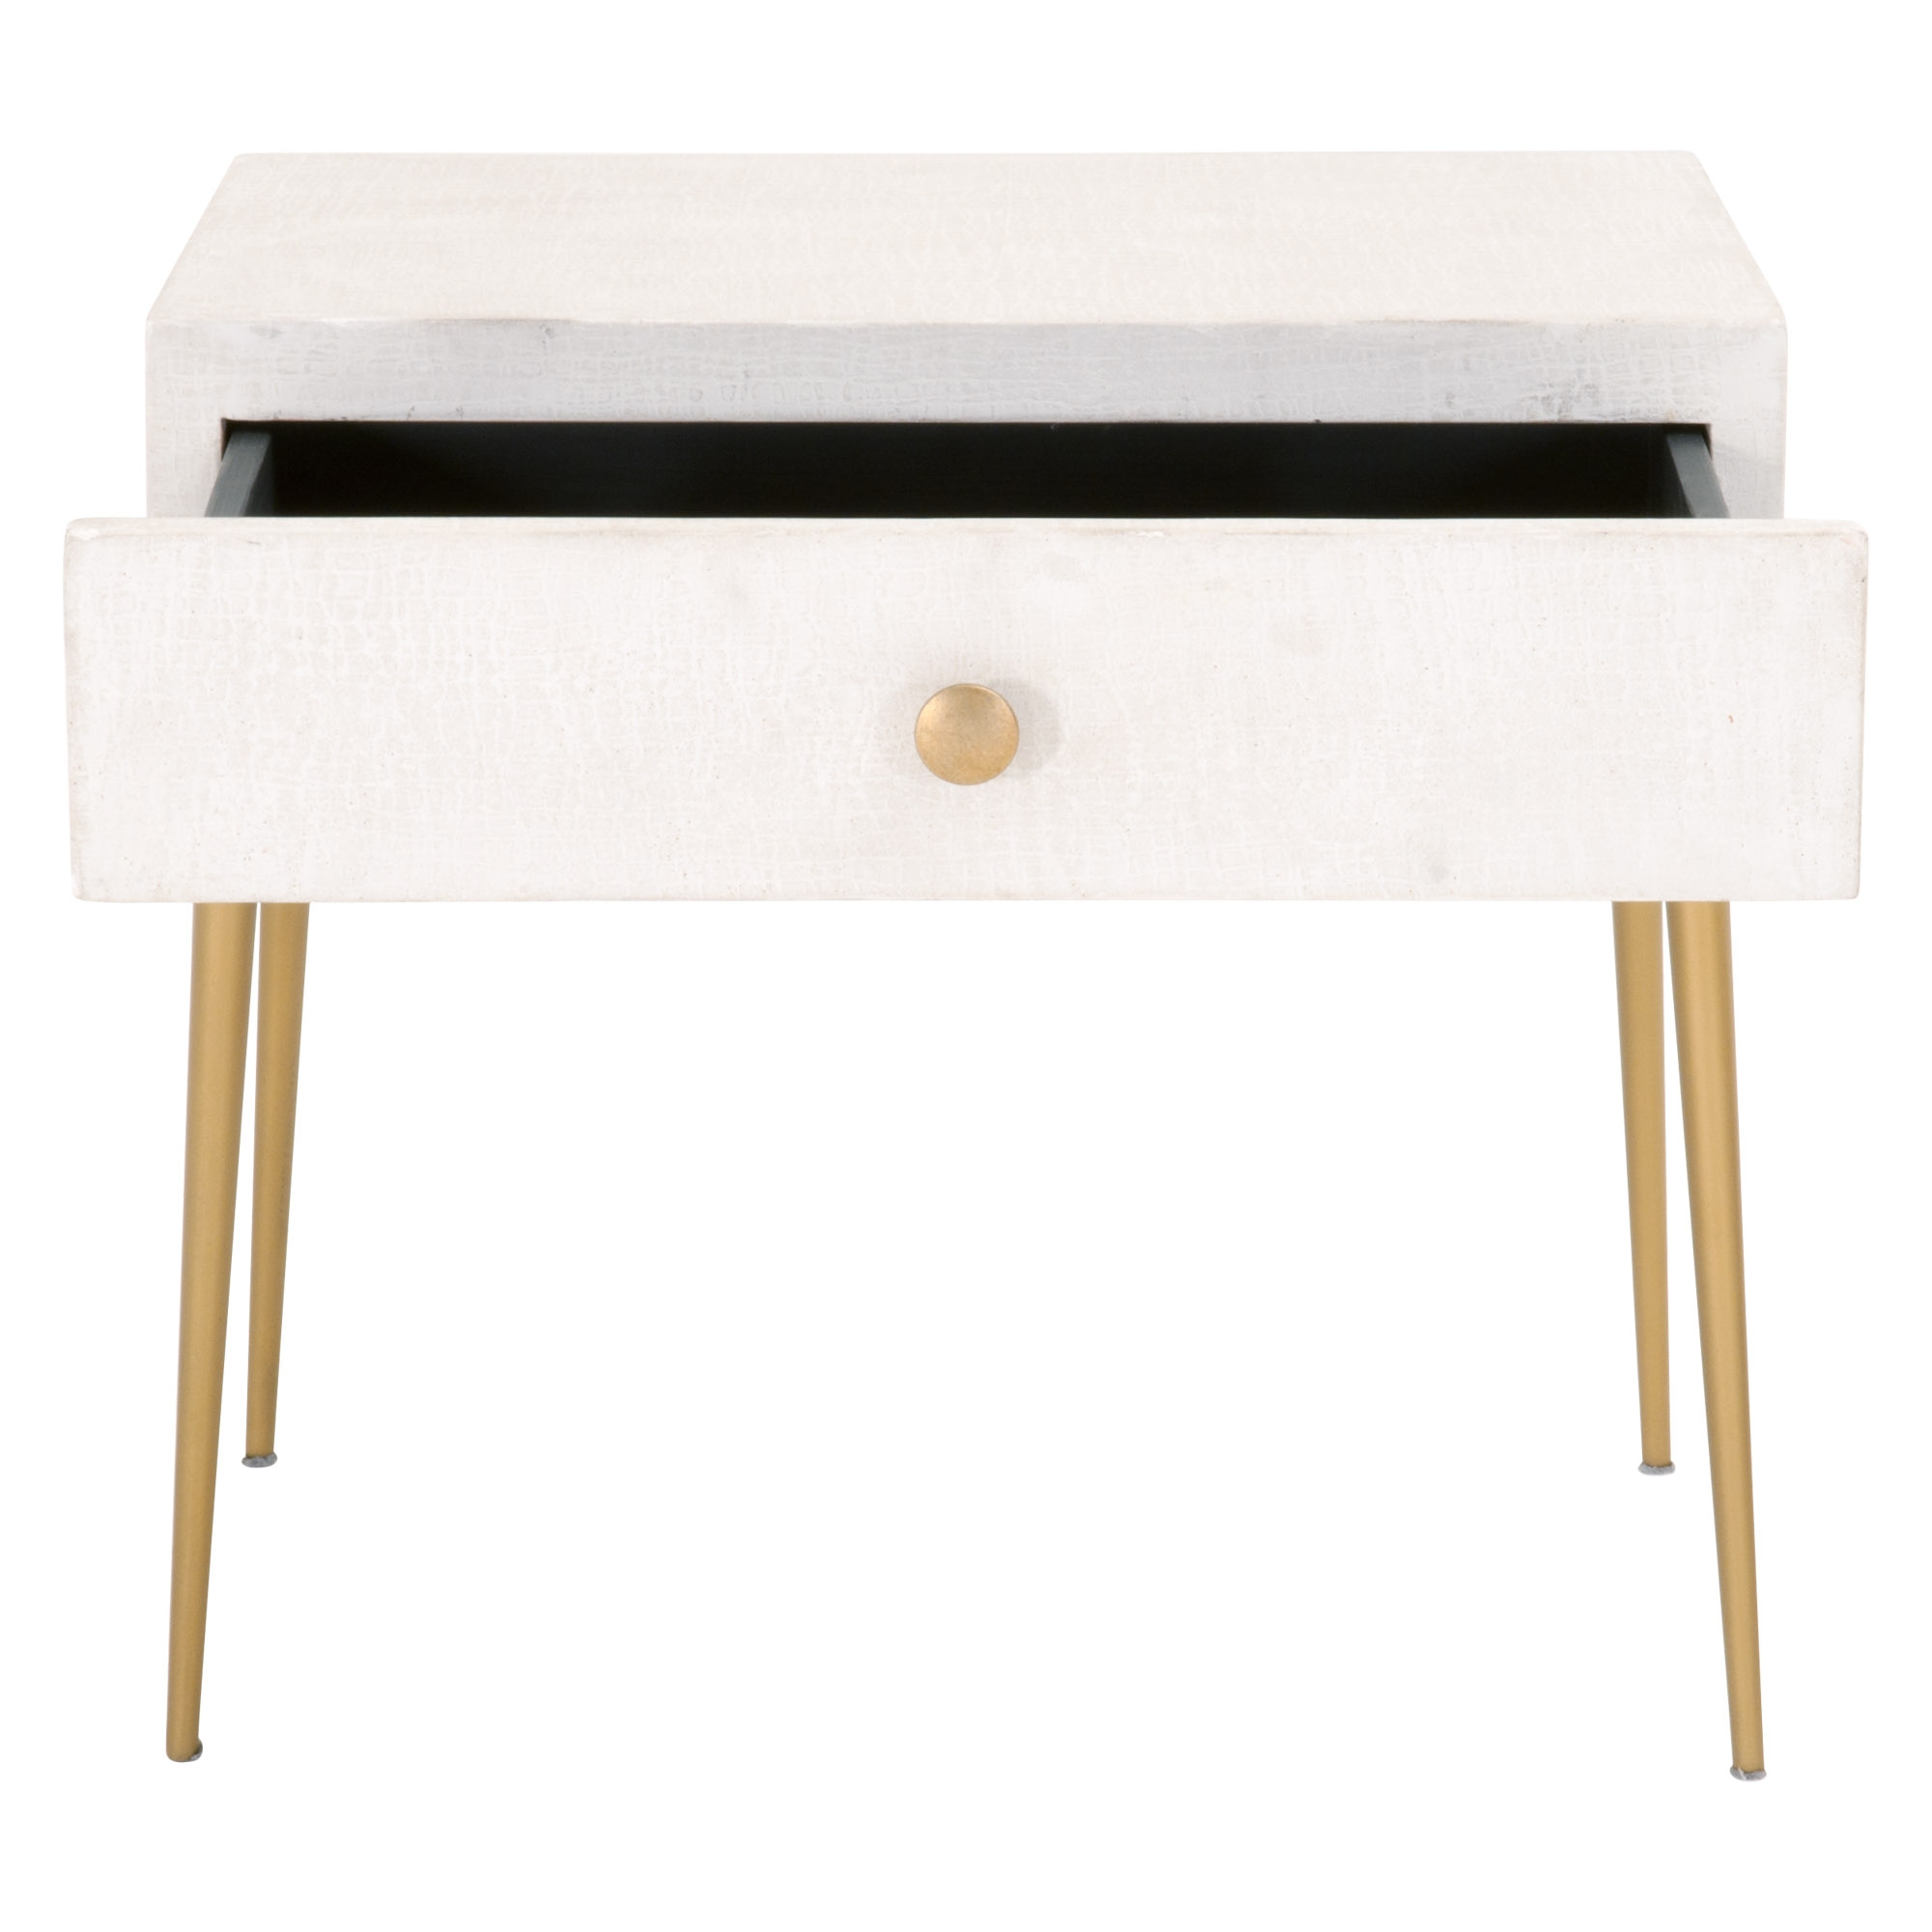 Melrose Accent Table - Image 1